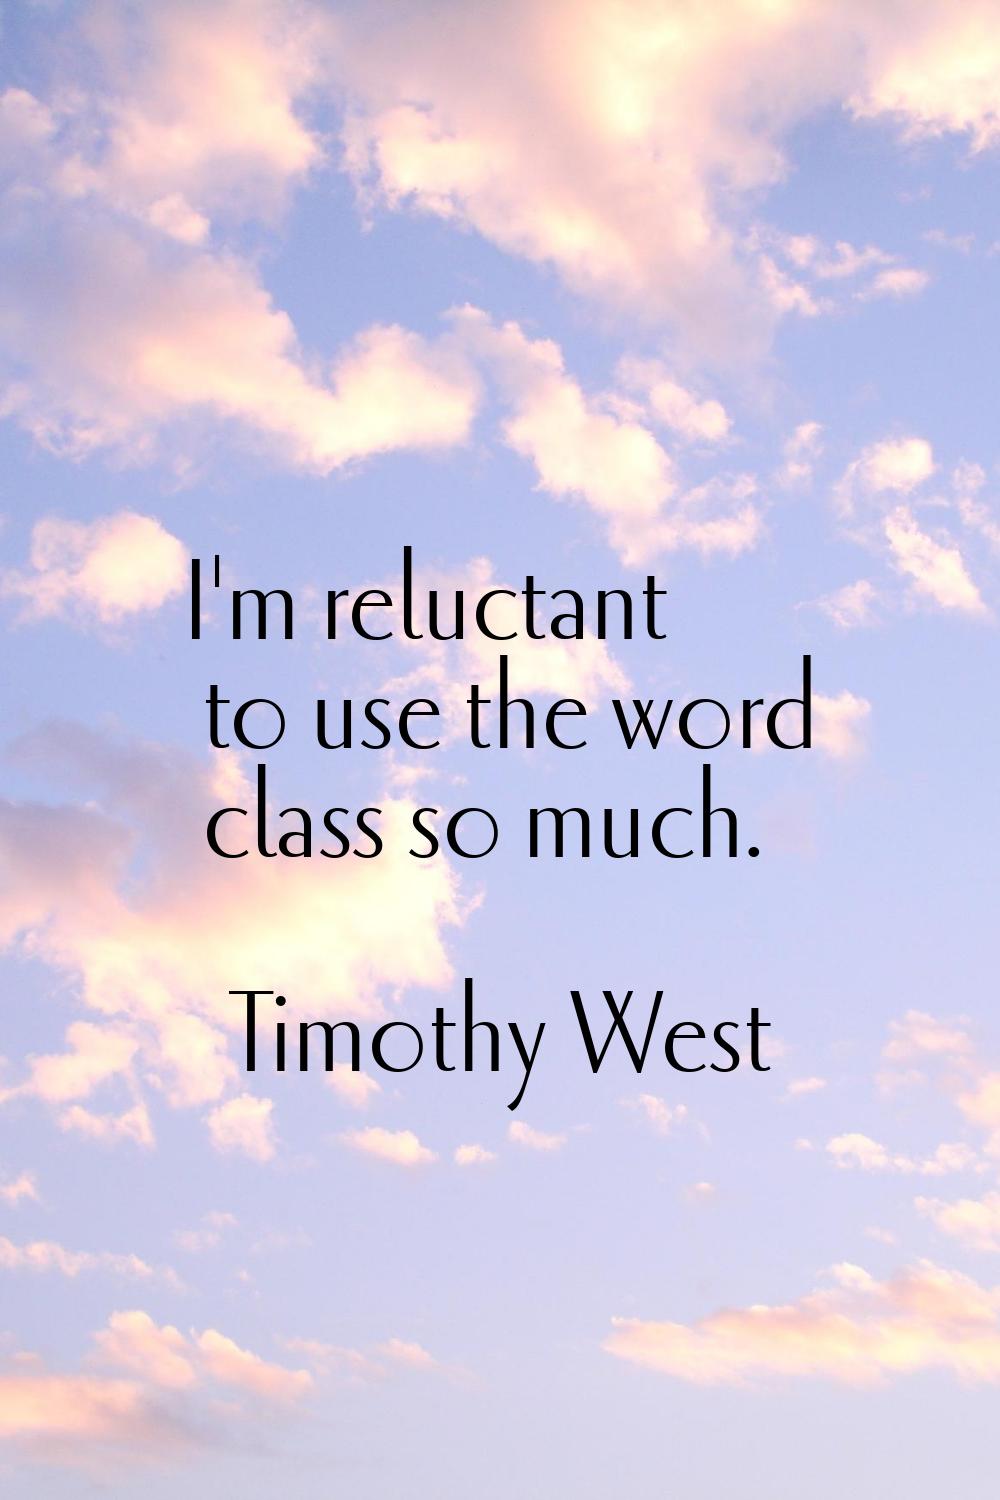 I'm reluctant to use the word class so much.